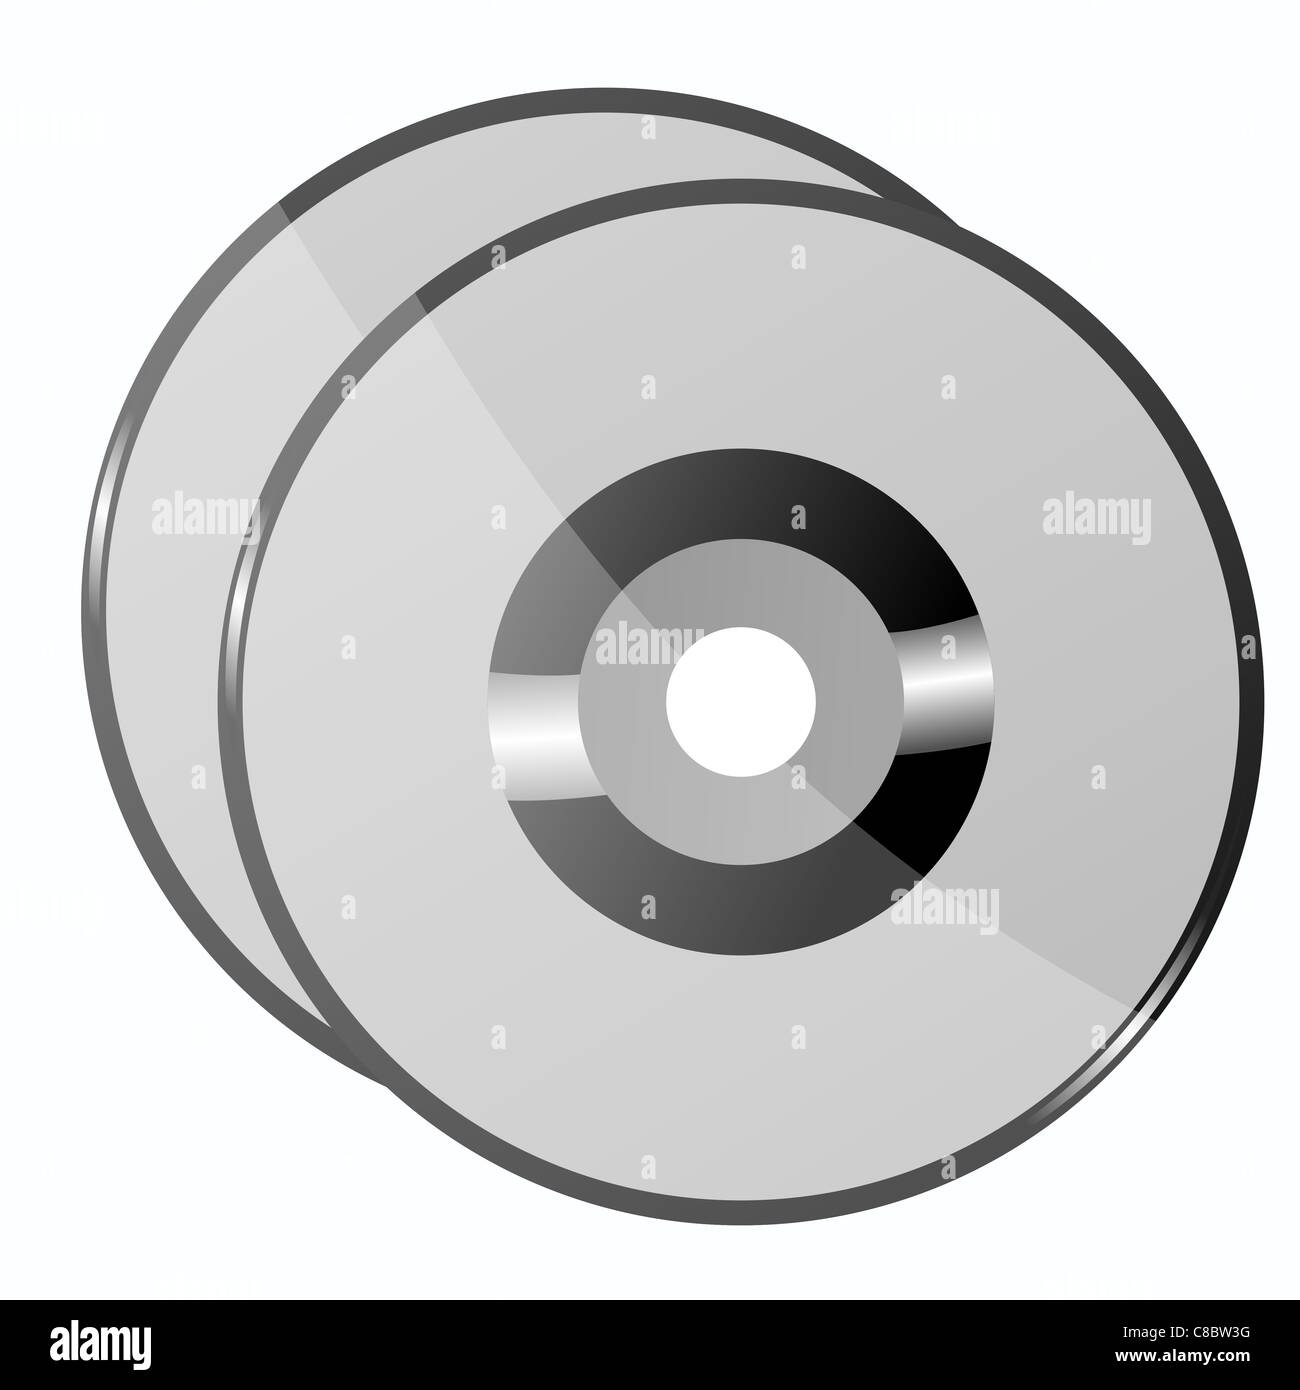 illustration of compact disc on white background Stock Photo